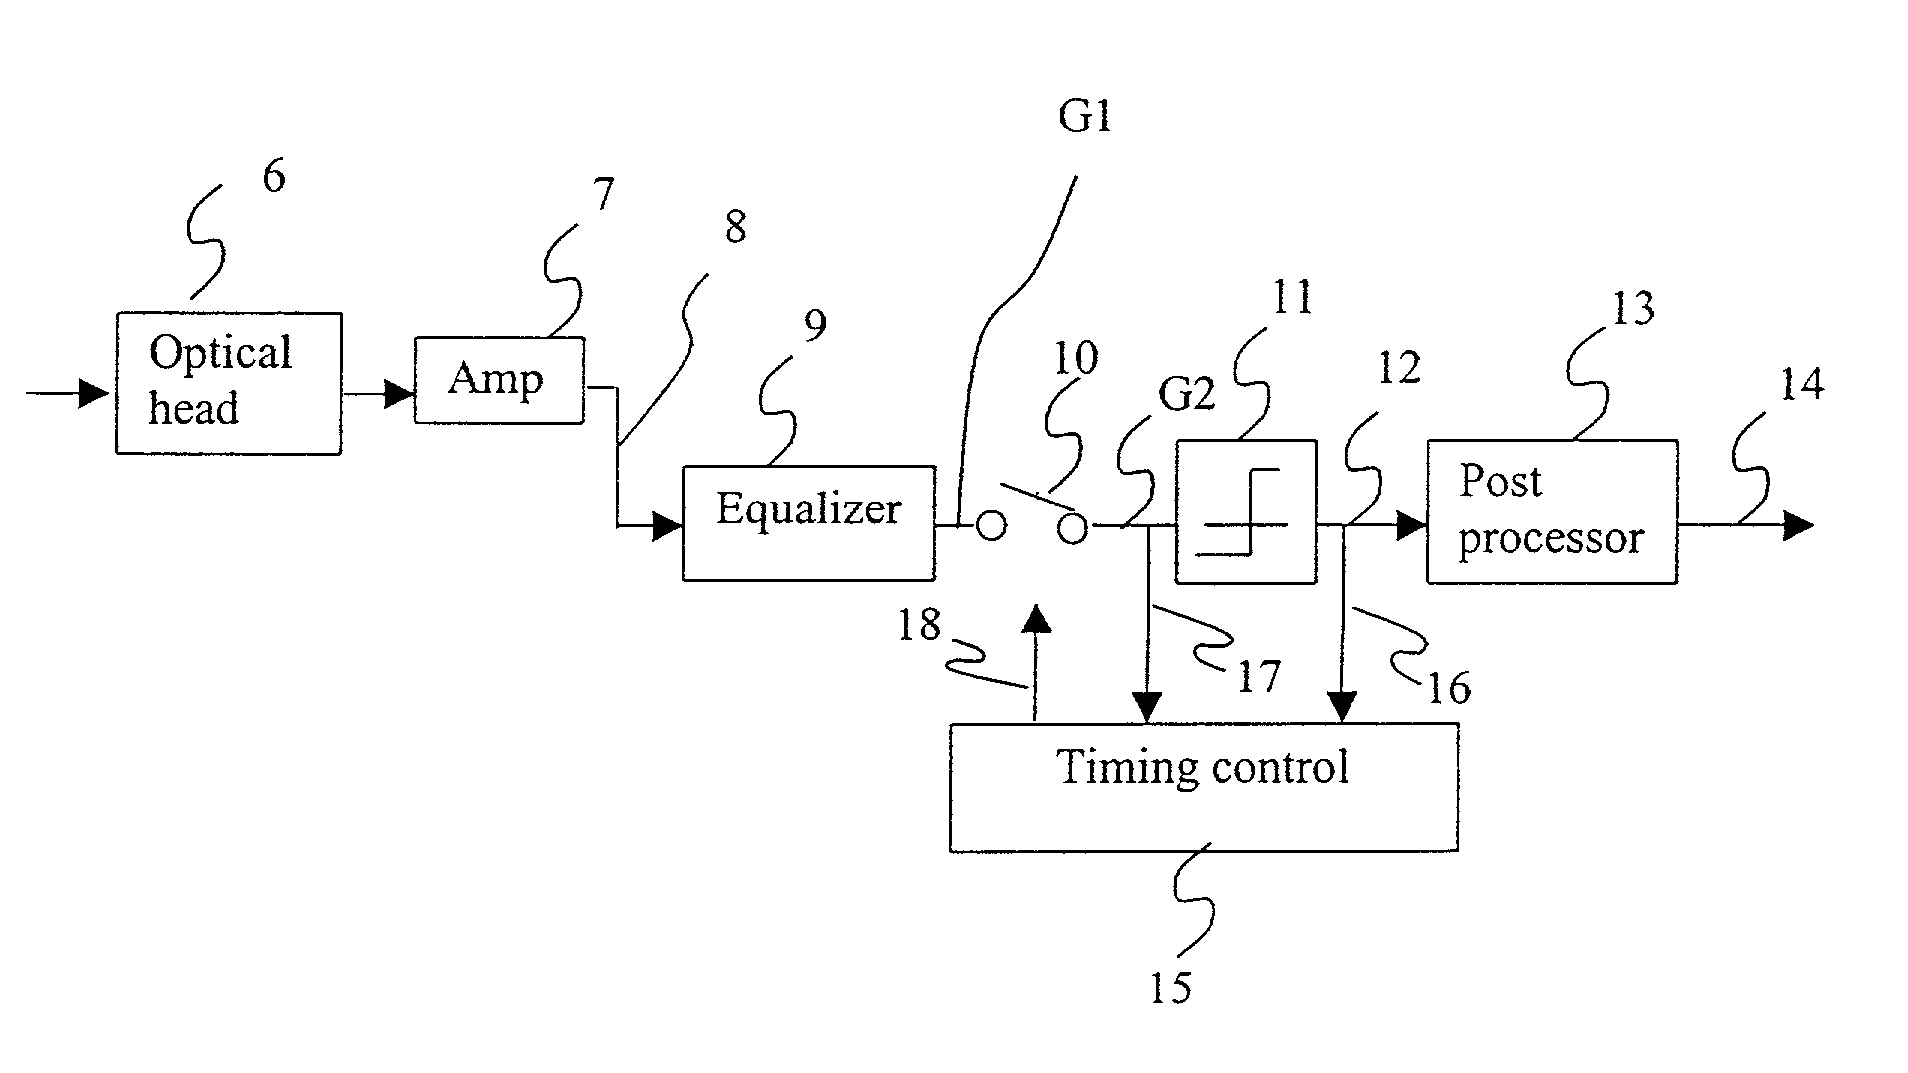 Data processing apparatus and method for d=2 optical channels